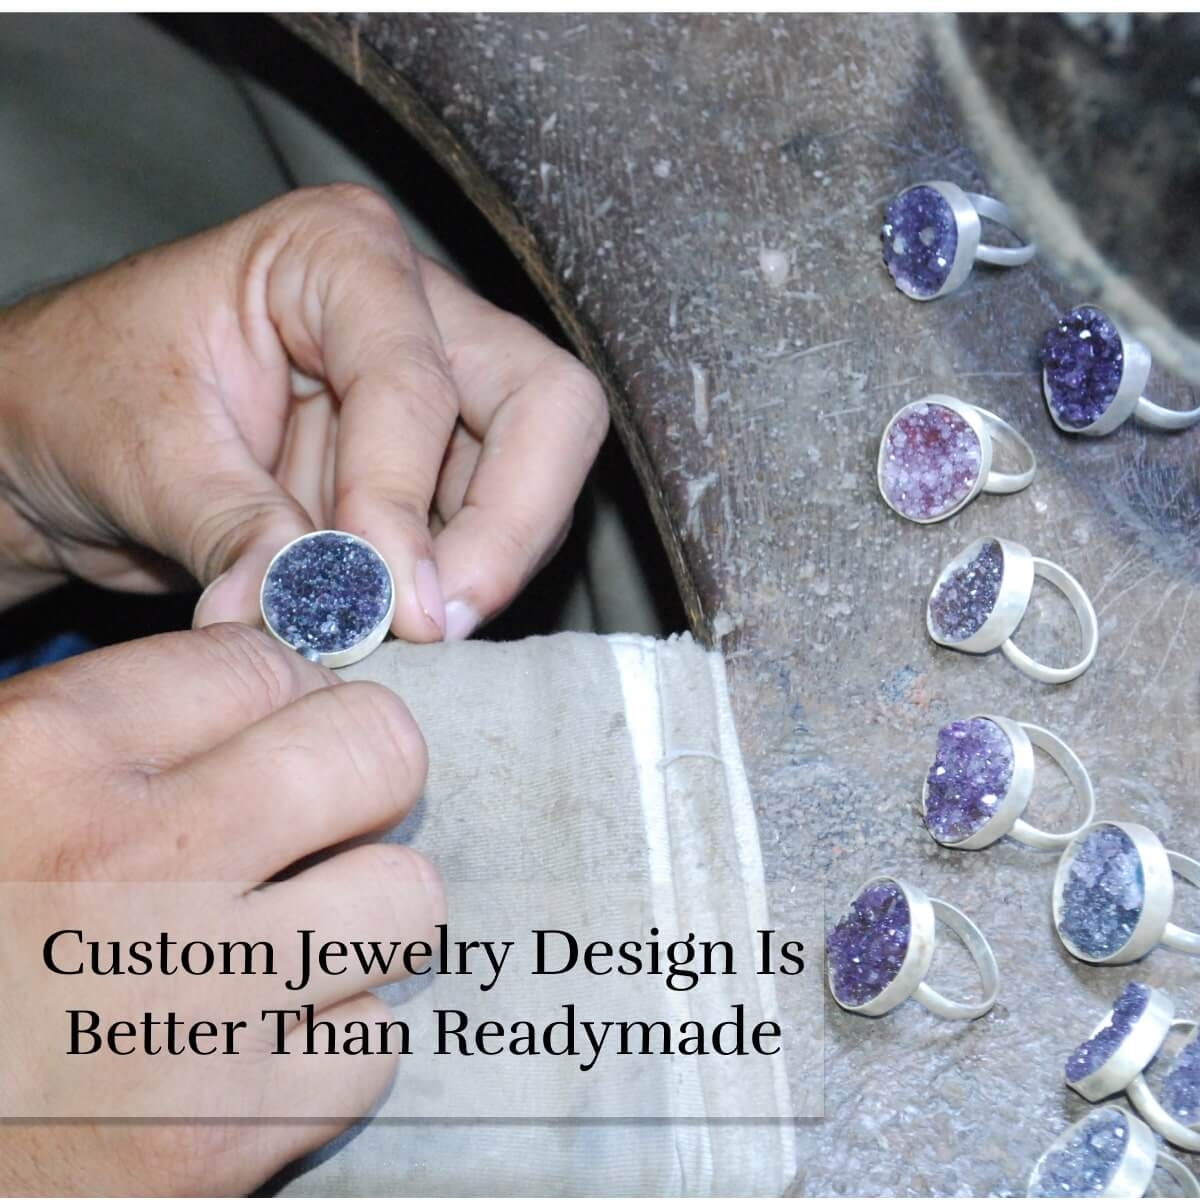 Why Custom Jewelry Design Is Better Than Readymade